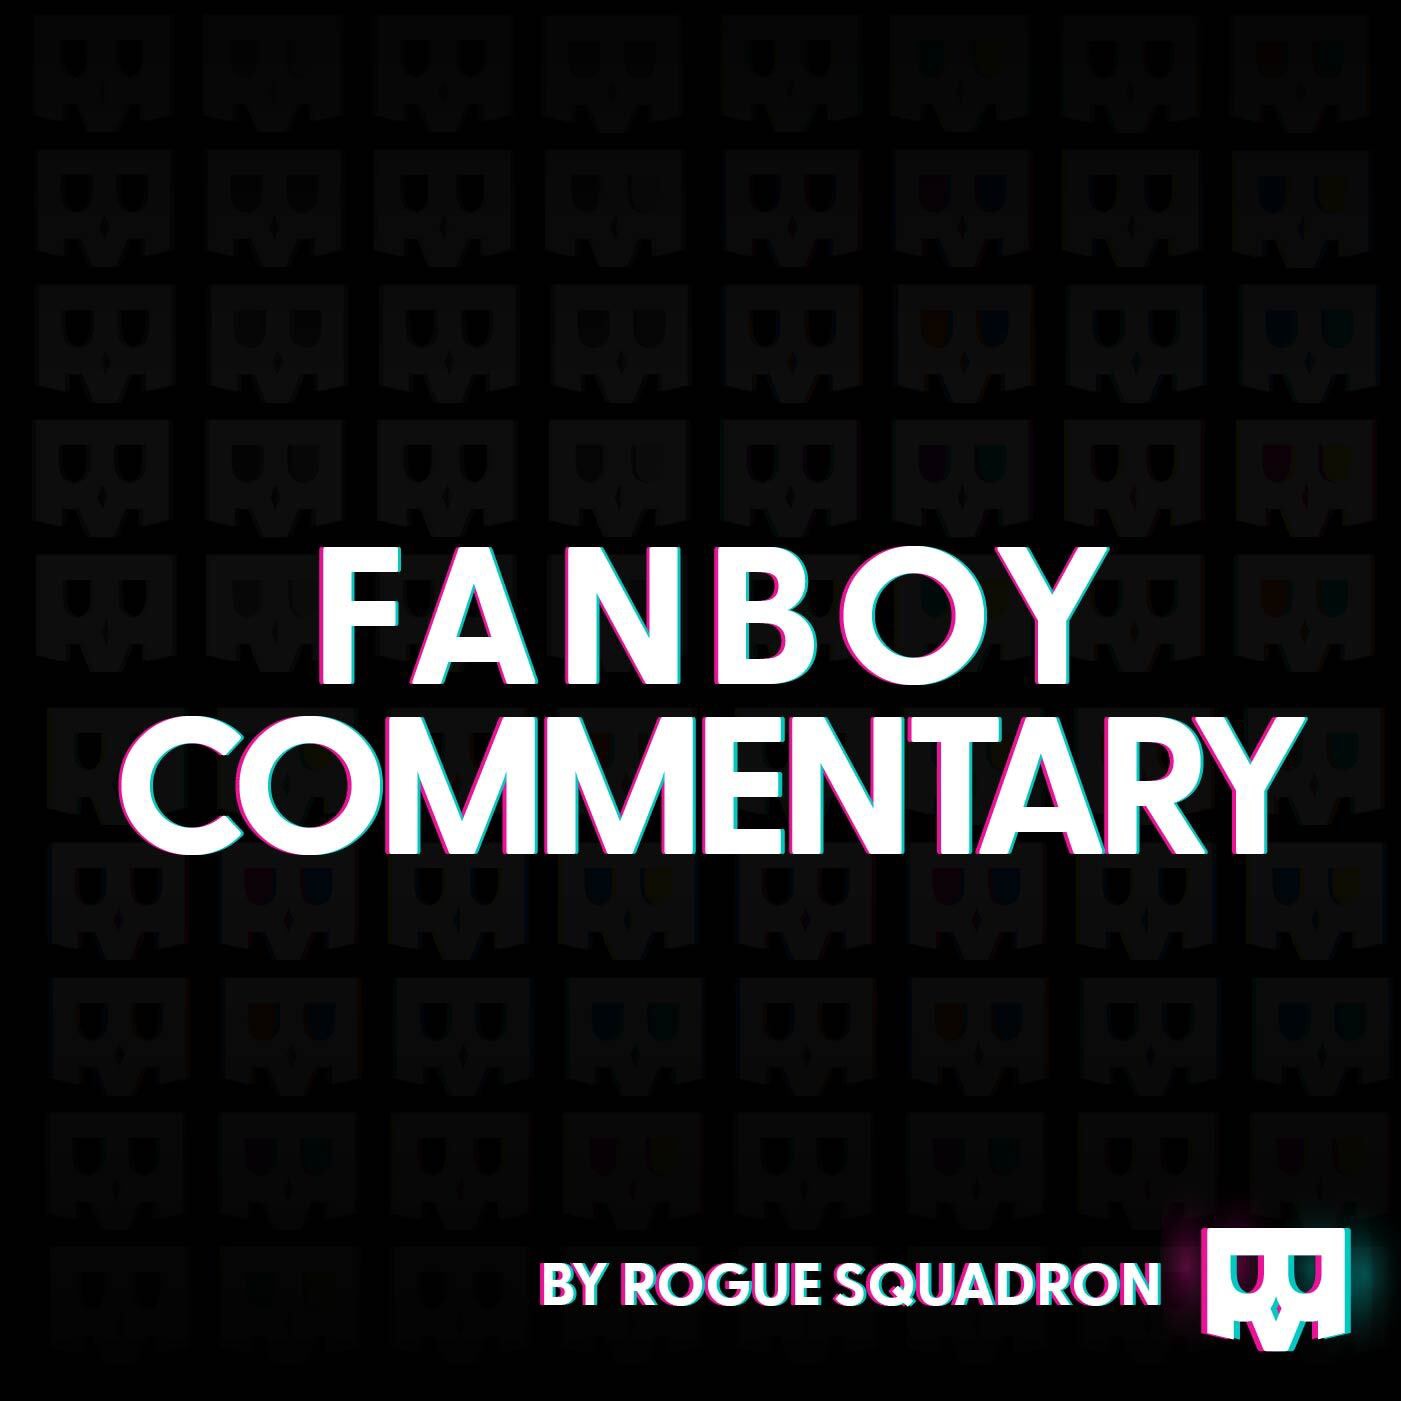 Artwork for Fanboy Commentary by Rogue Squadron